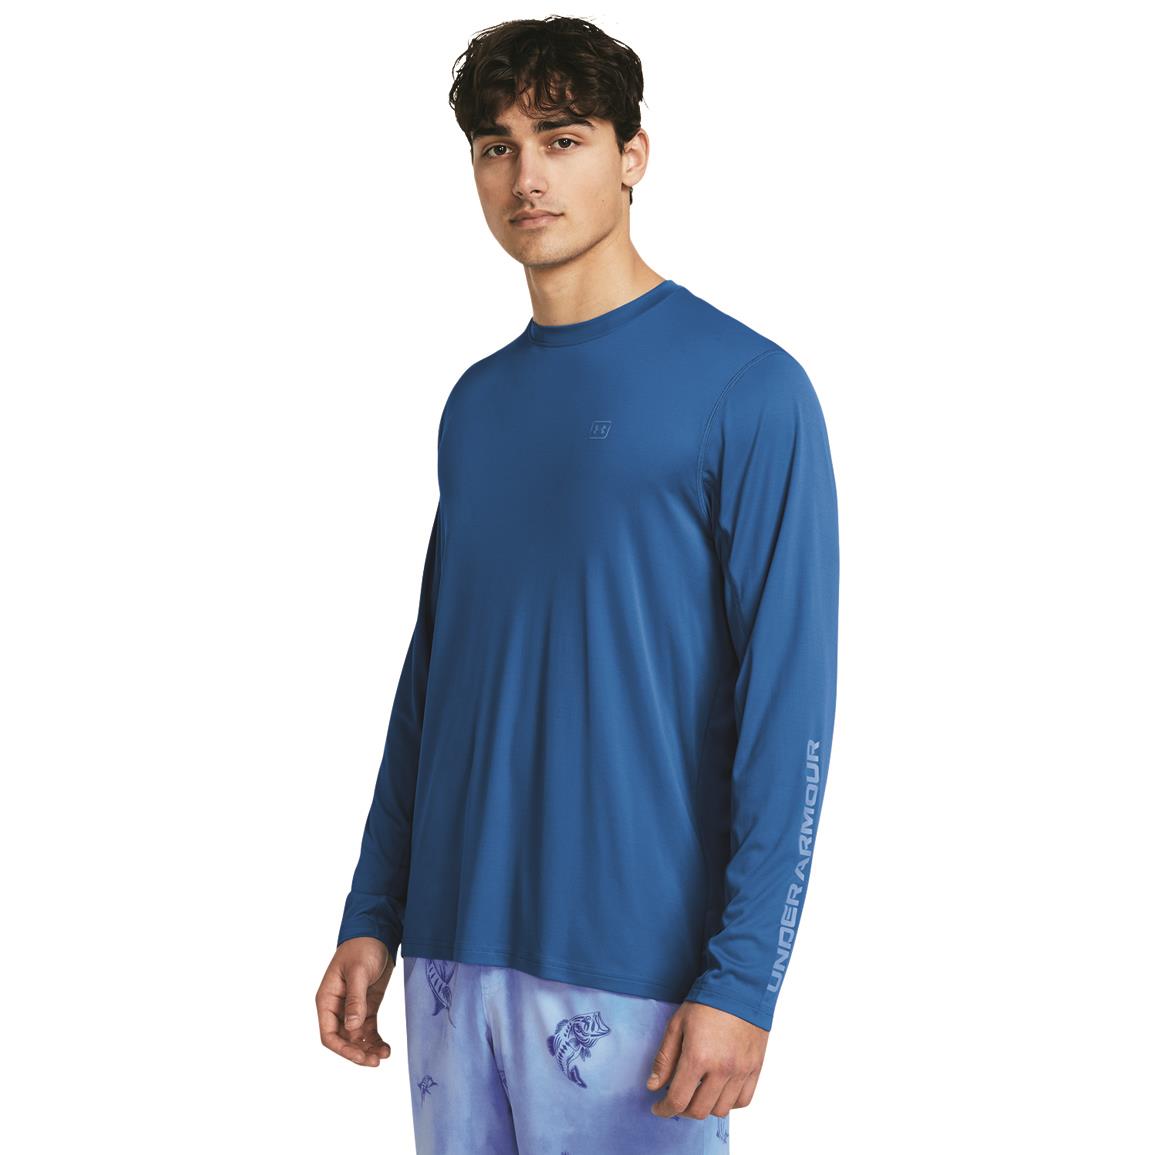 Under Armour Men's Fish Pro Chill Freedom Long Sleeve Fishing